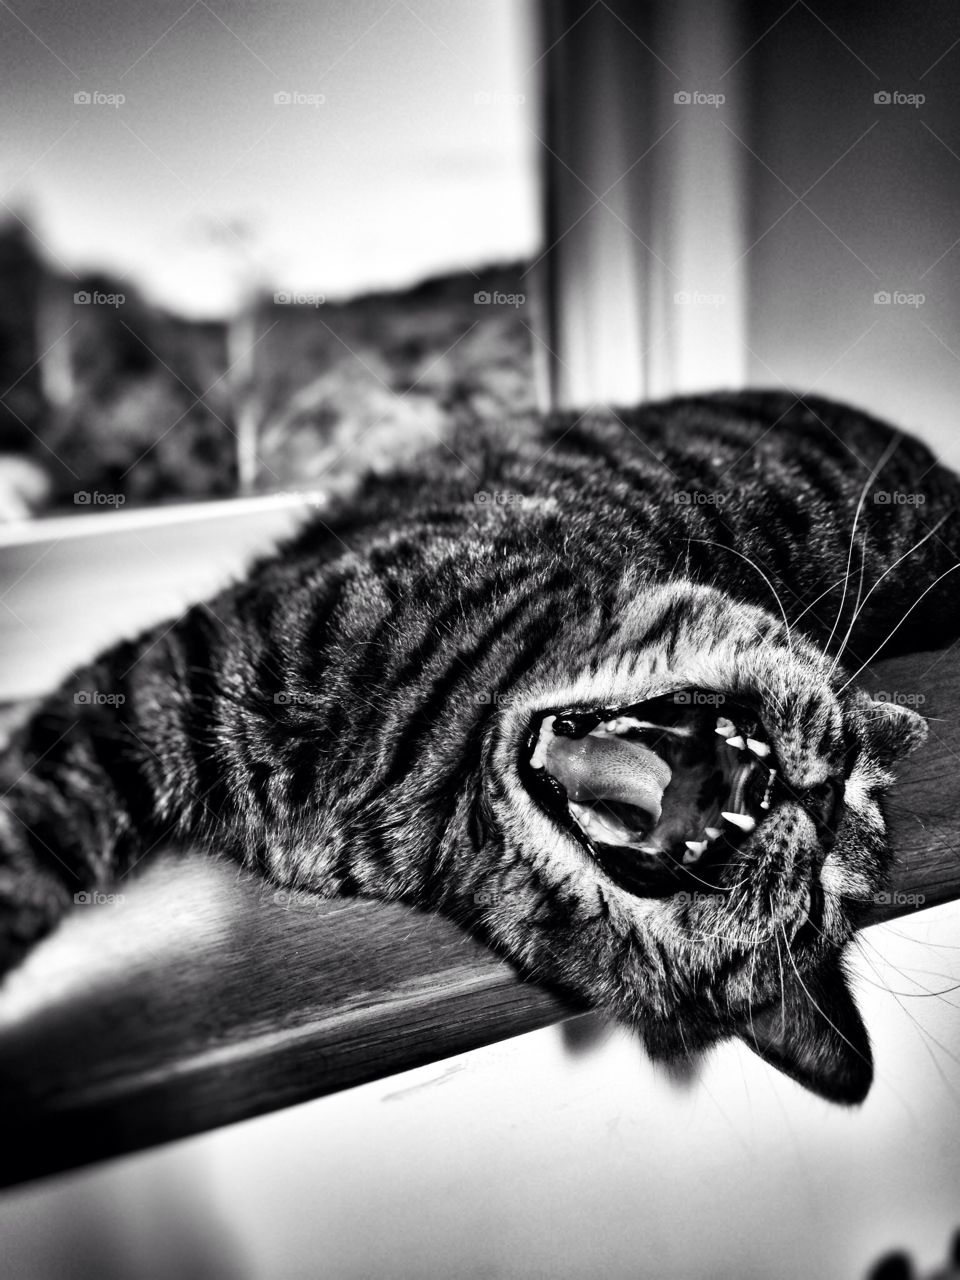 Black and white photo of
My cat seeing the funny side
